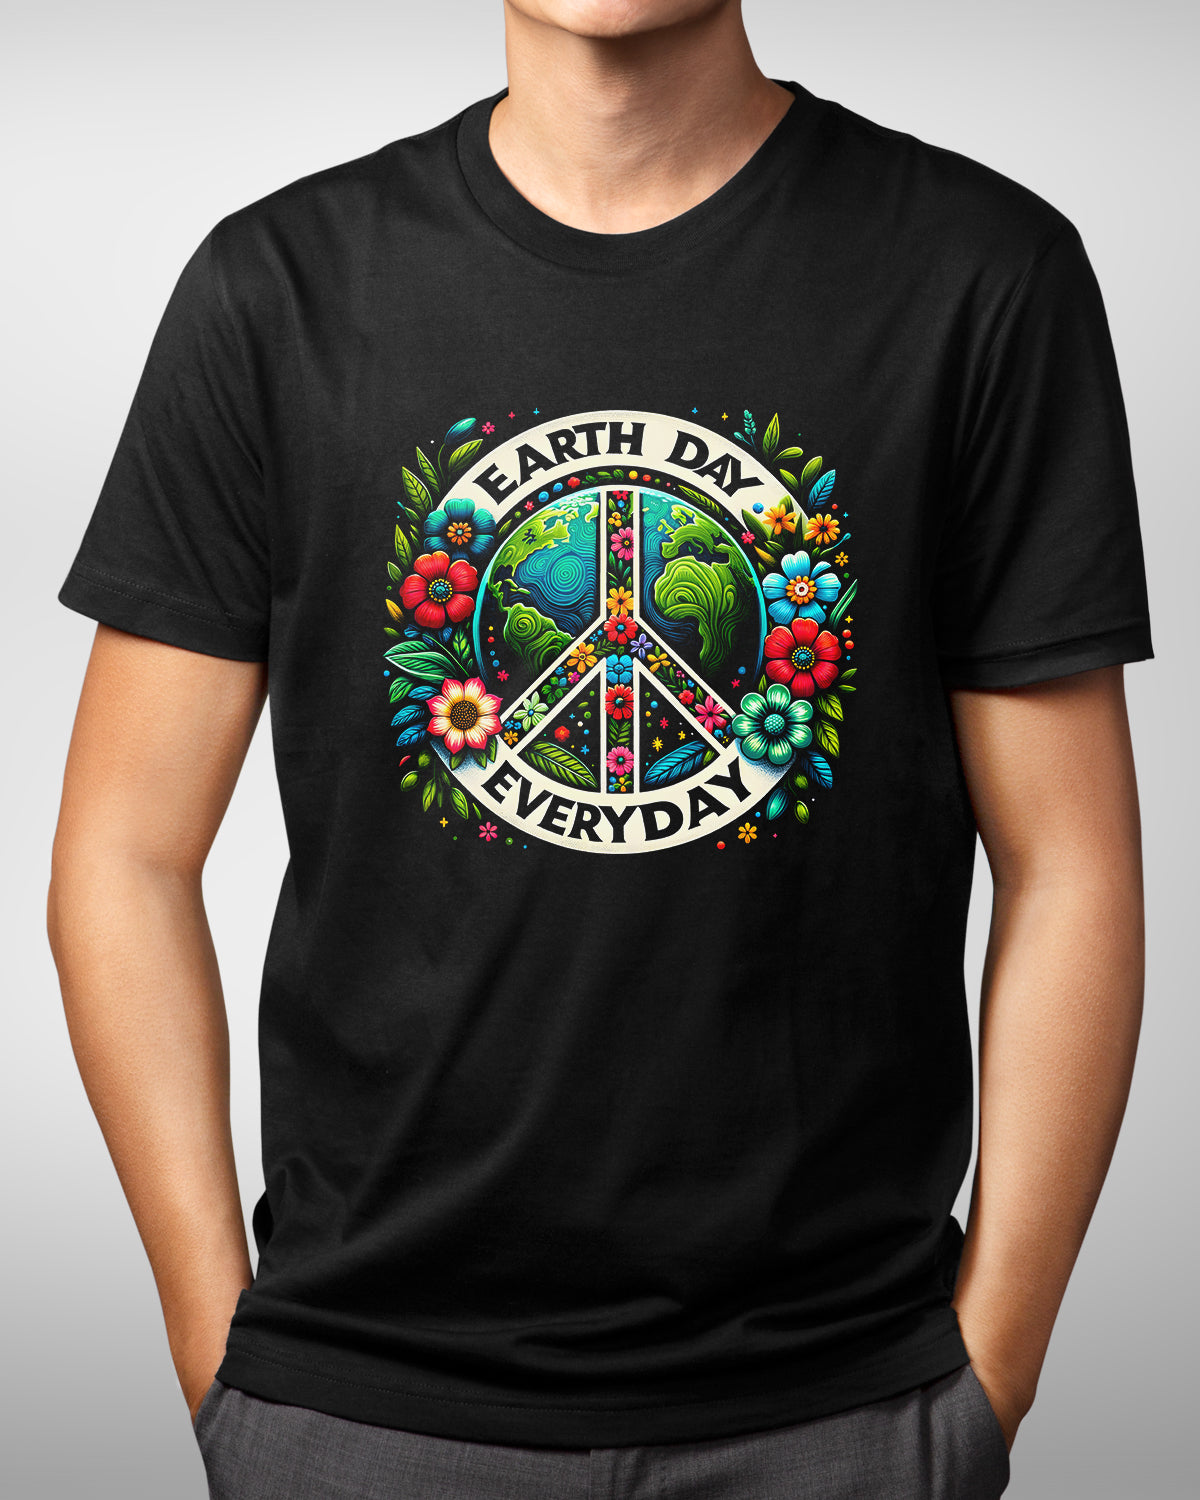 Earth Day Everyday Shirt, Protect Our Planet Tee, Nature Lover Gift, Climate Change Awareness